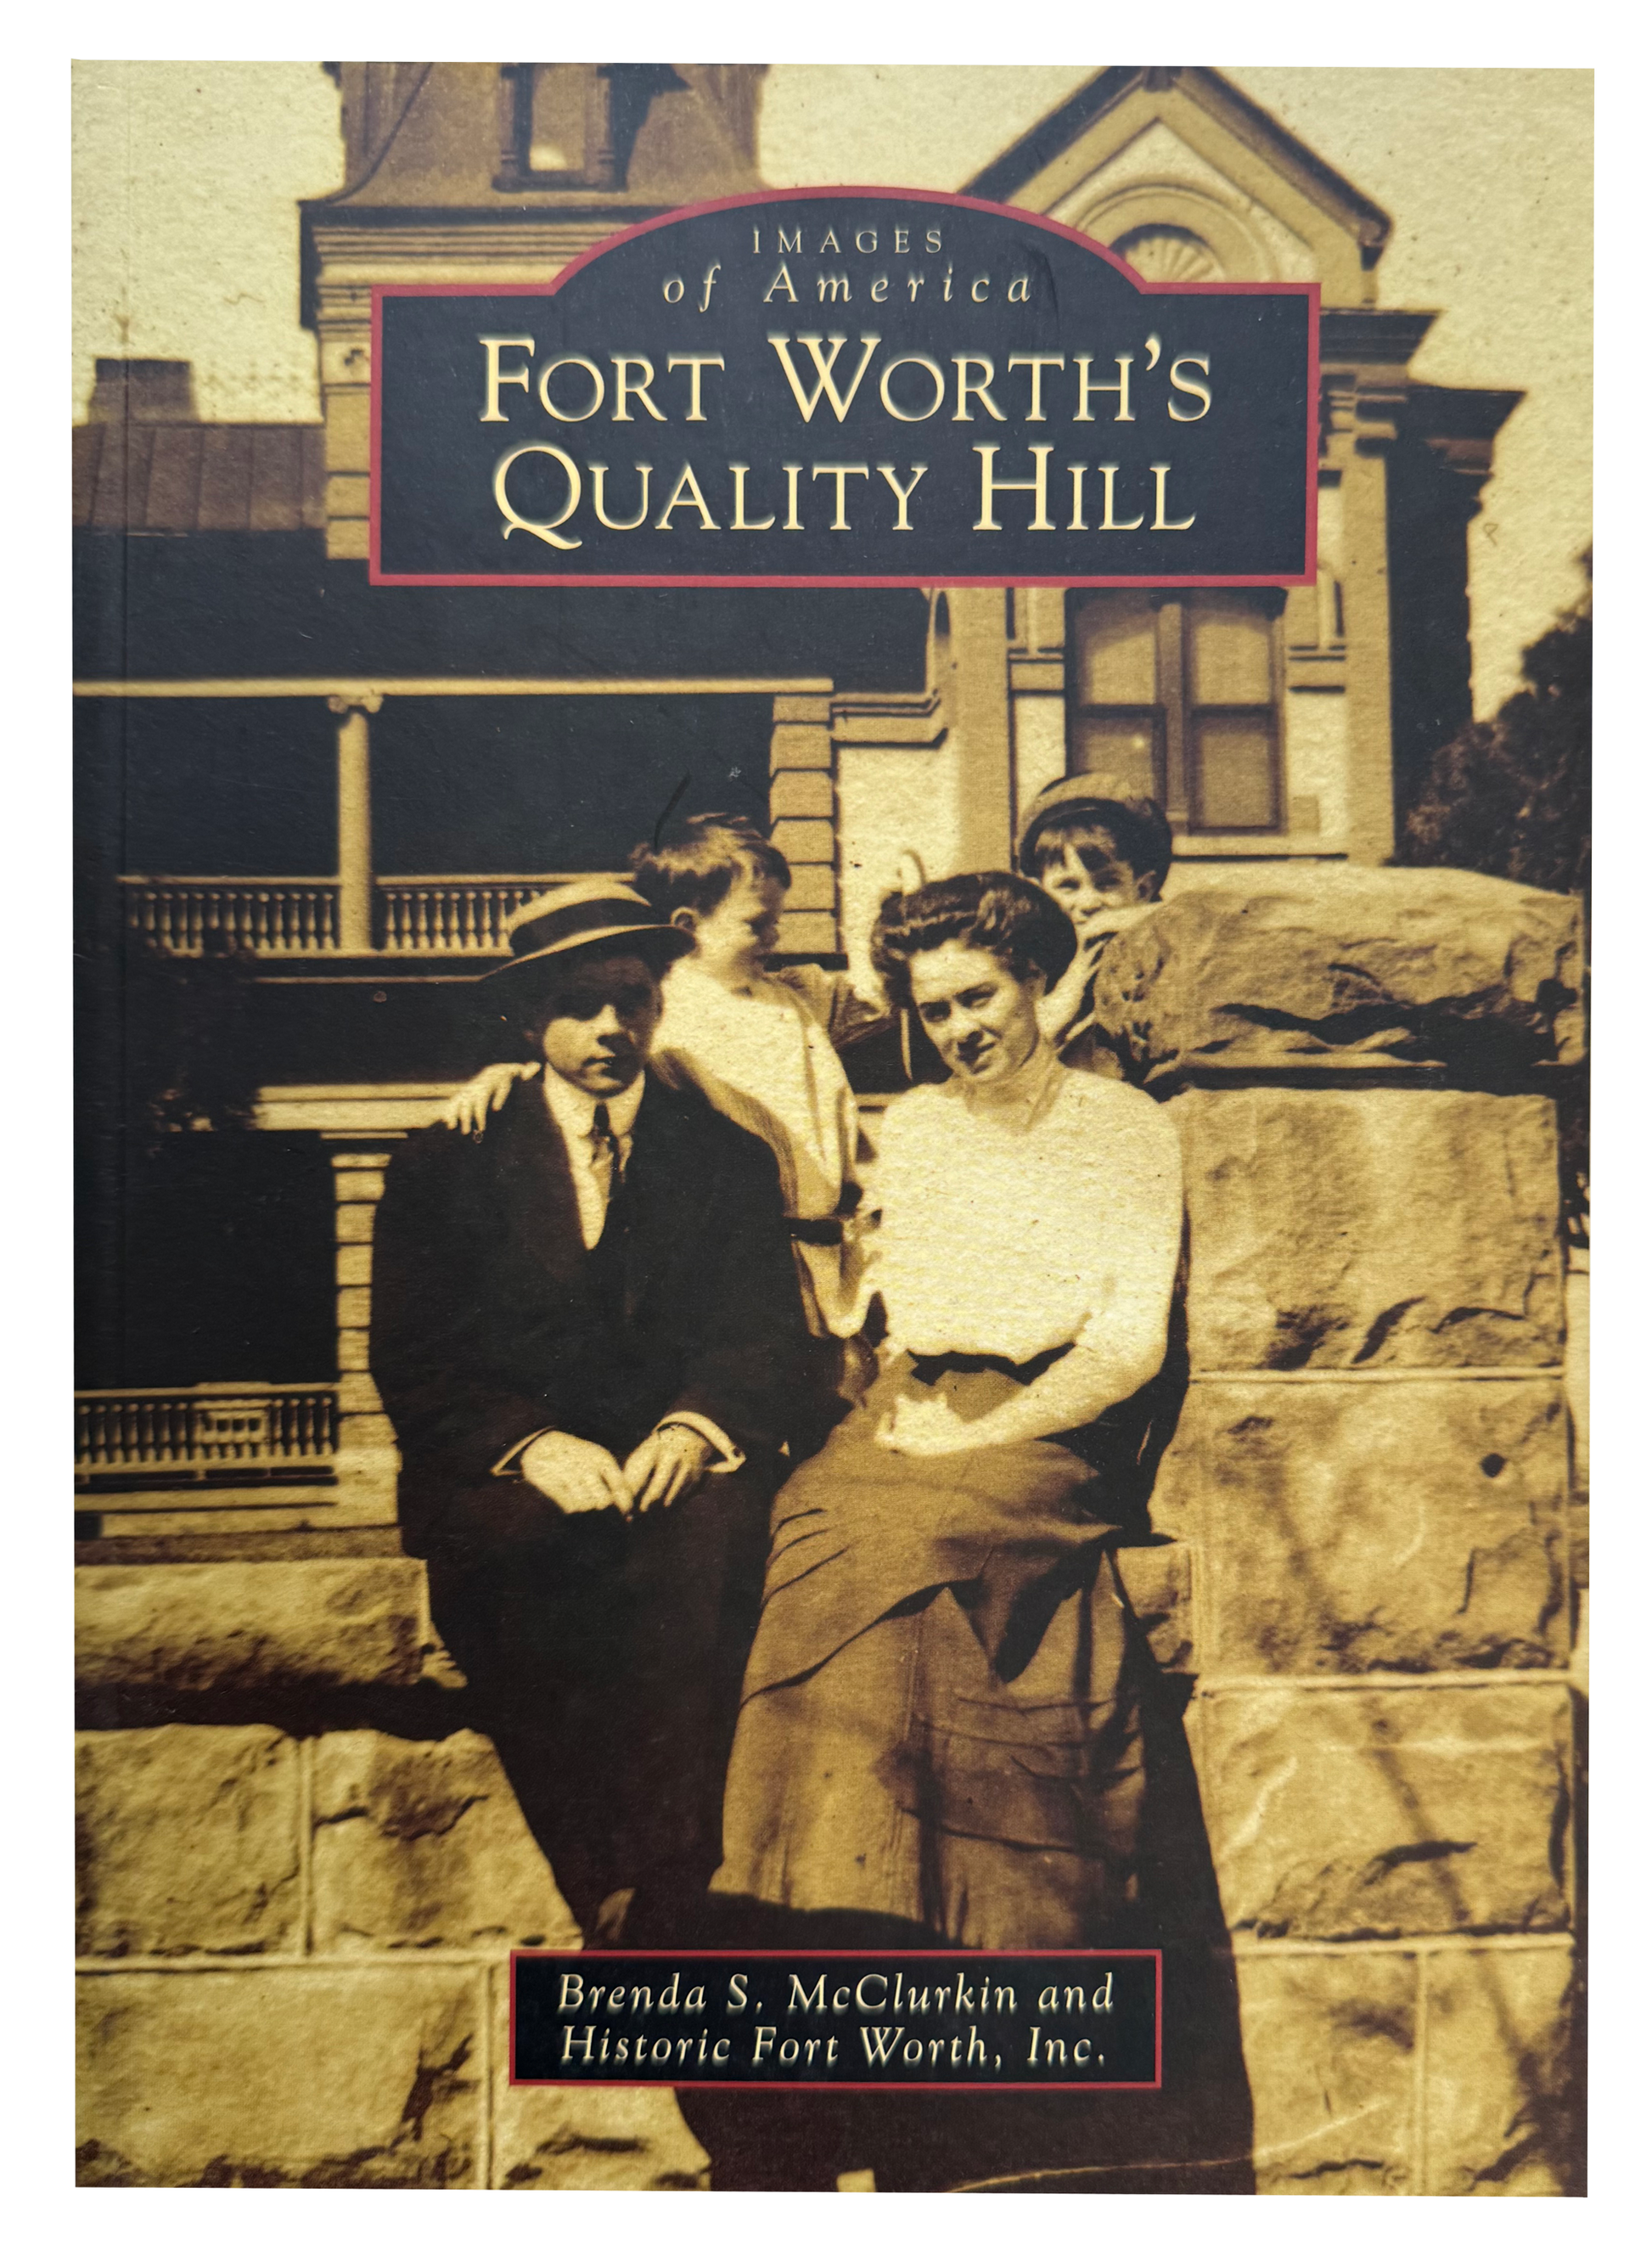 Book about Fort Worth's Quality Hill.